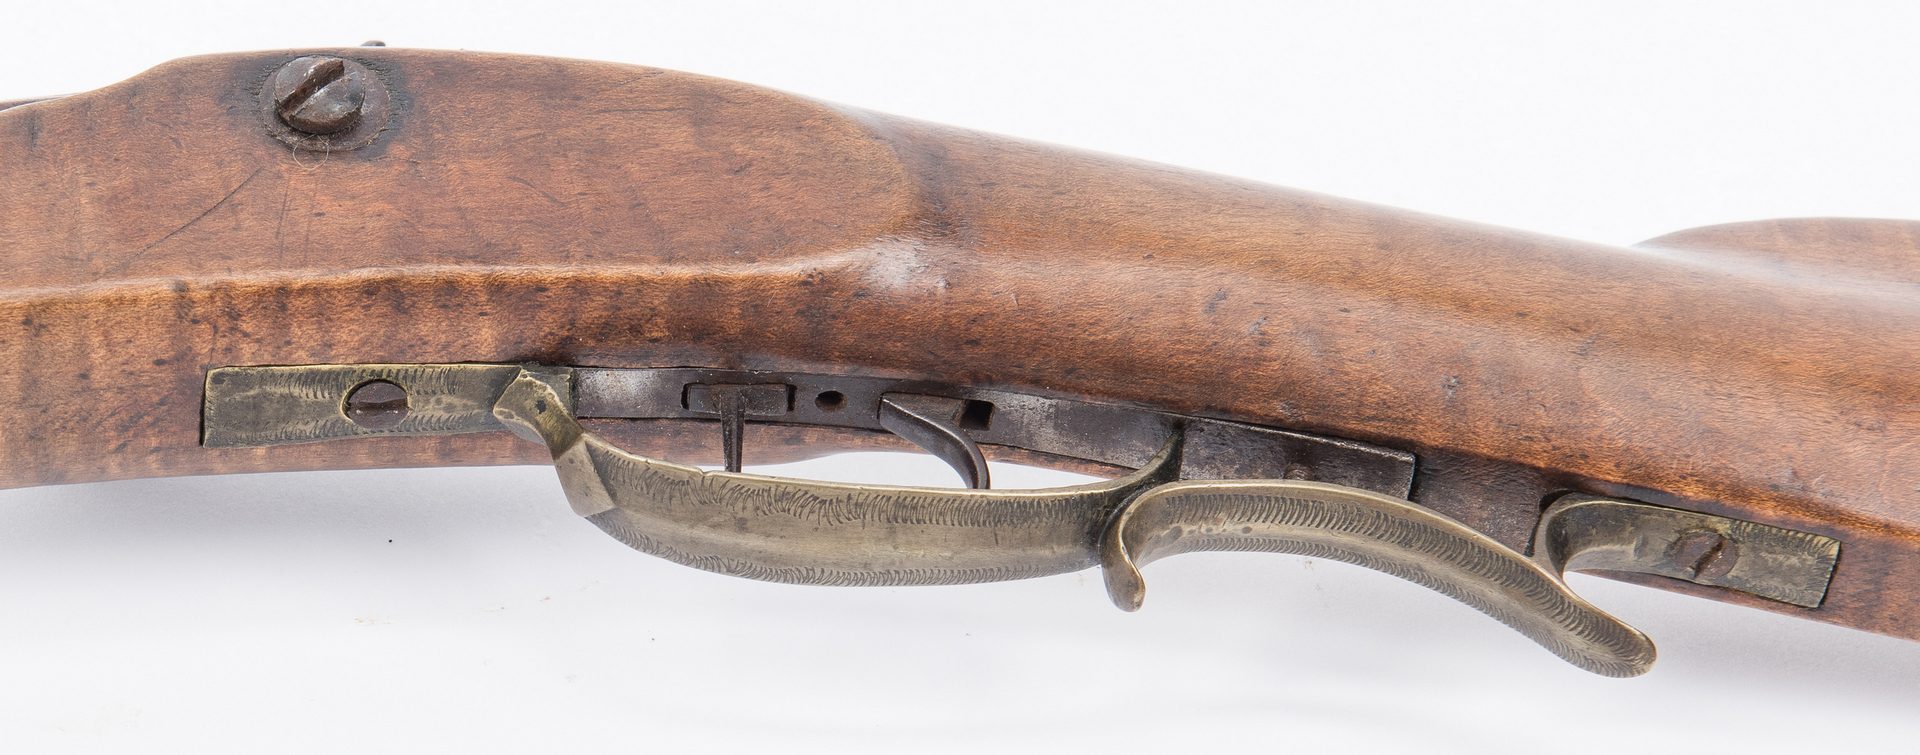 Lot 374: Percussion Long Rifle and Vicksburg Commission, 2 items